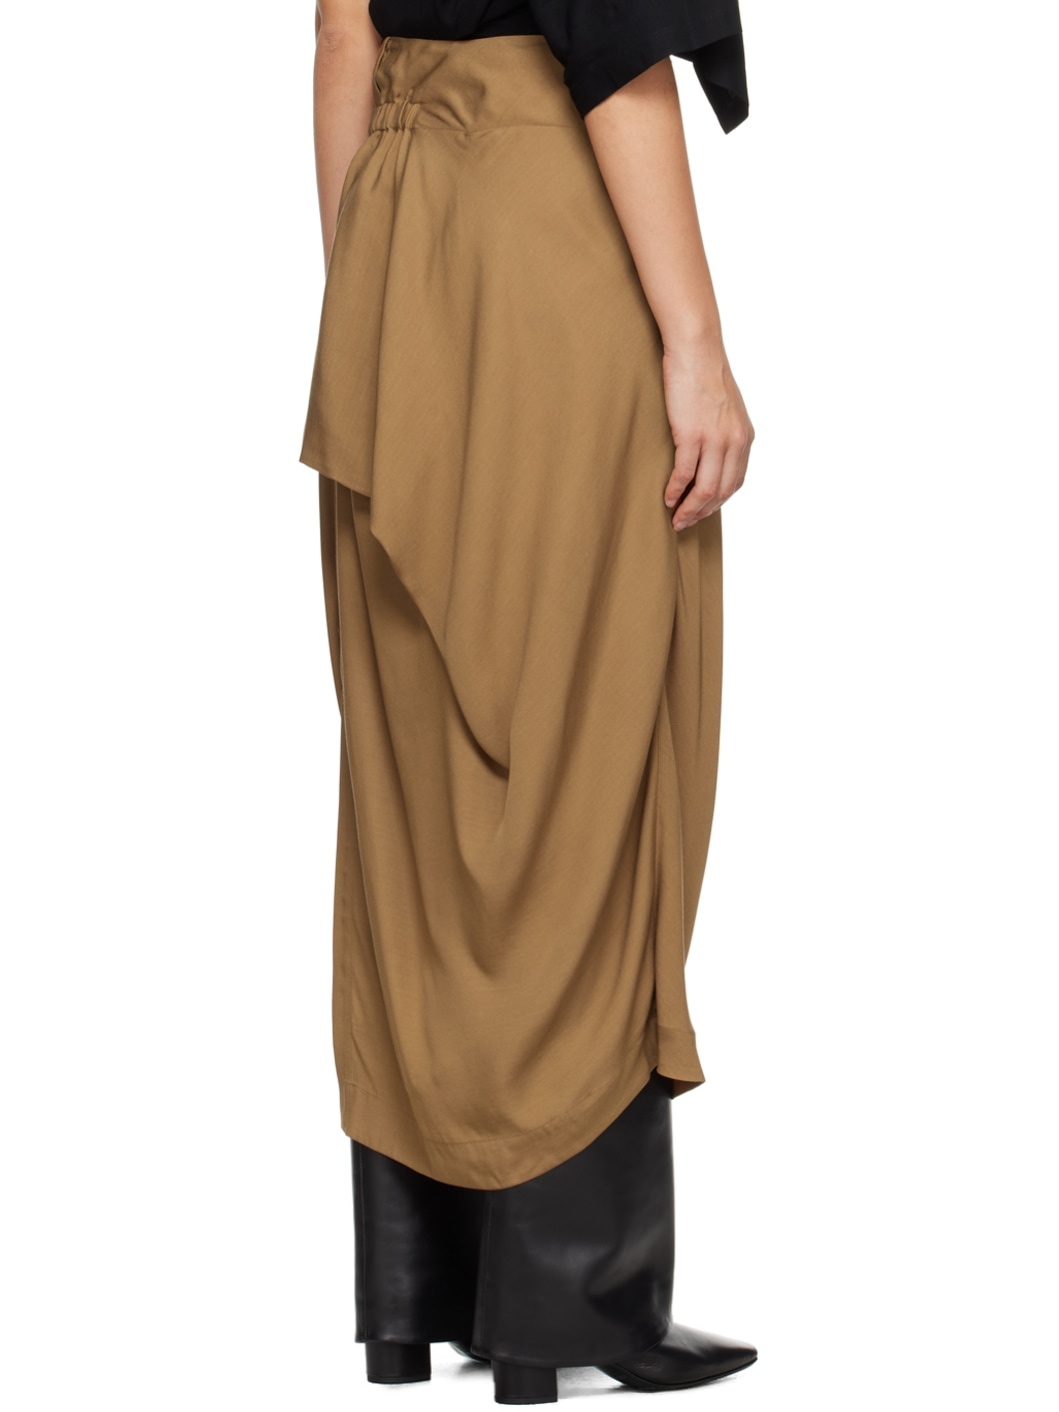 Brown Canopy Maxi Skirt - 3